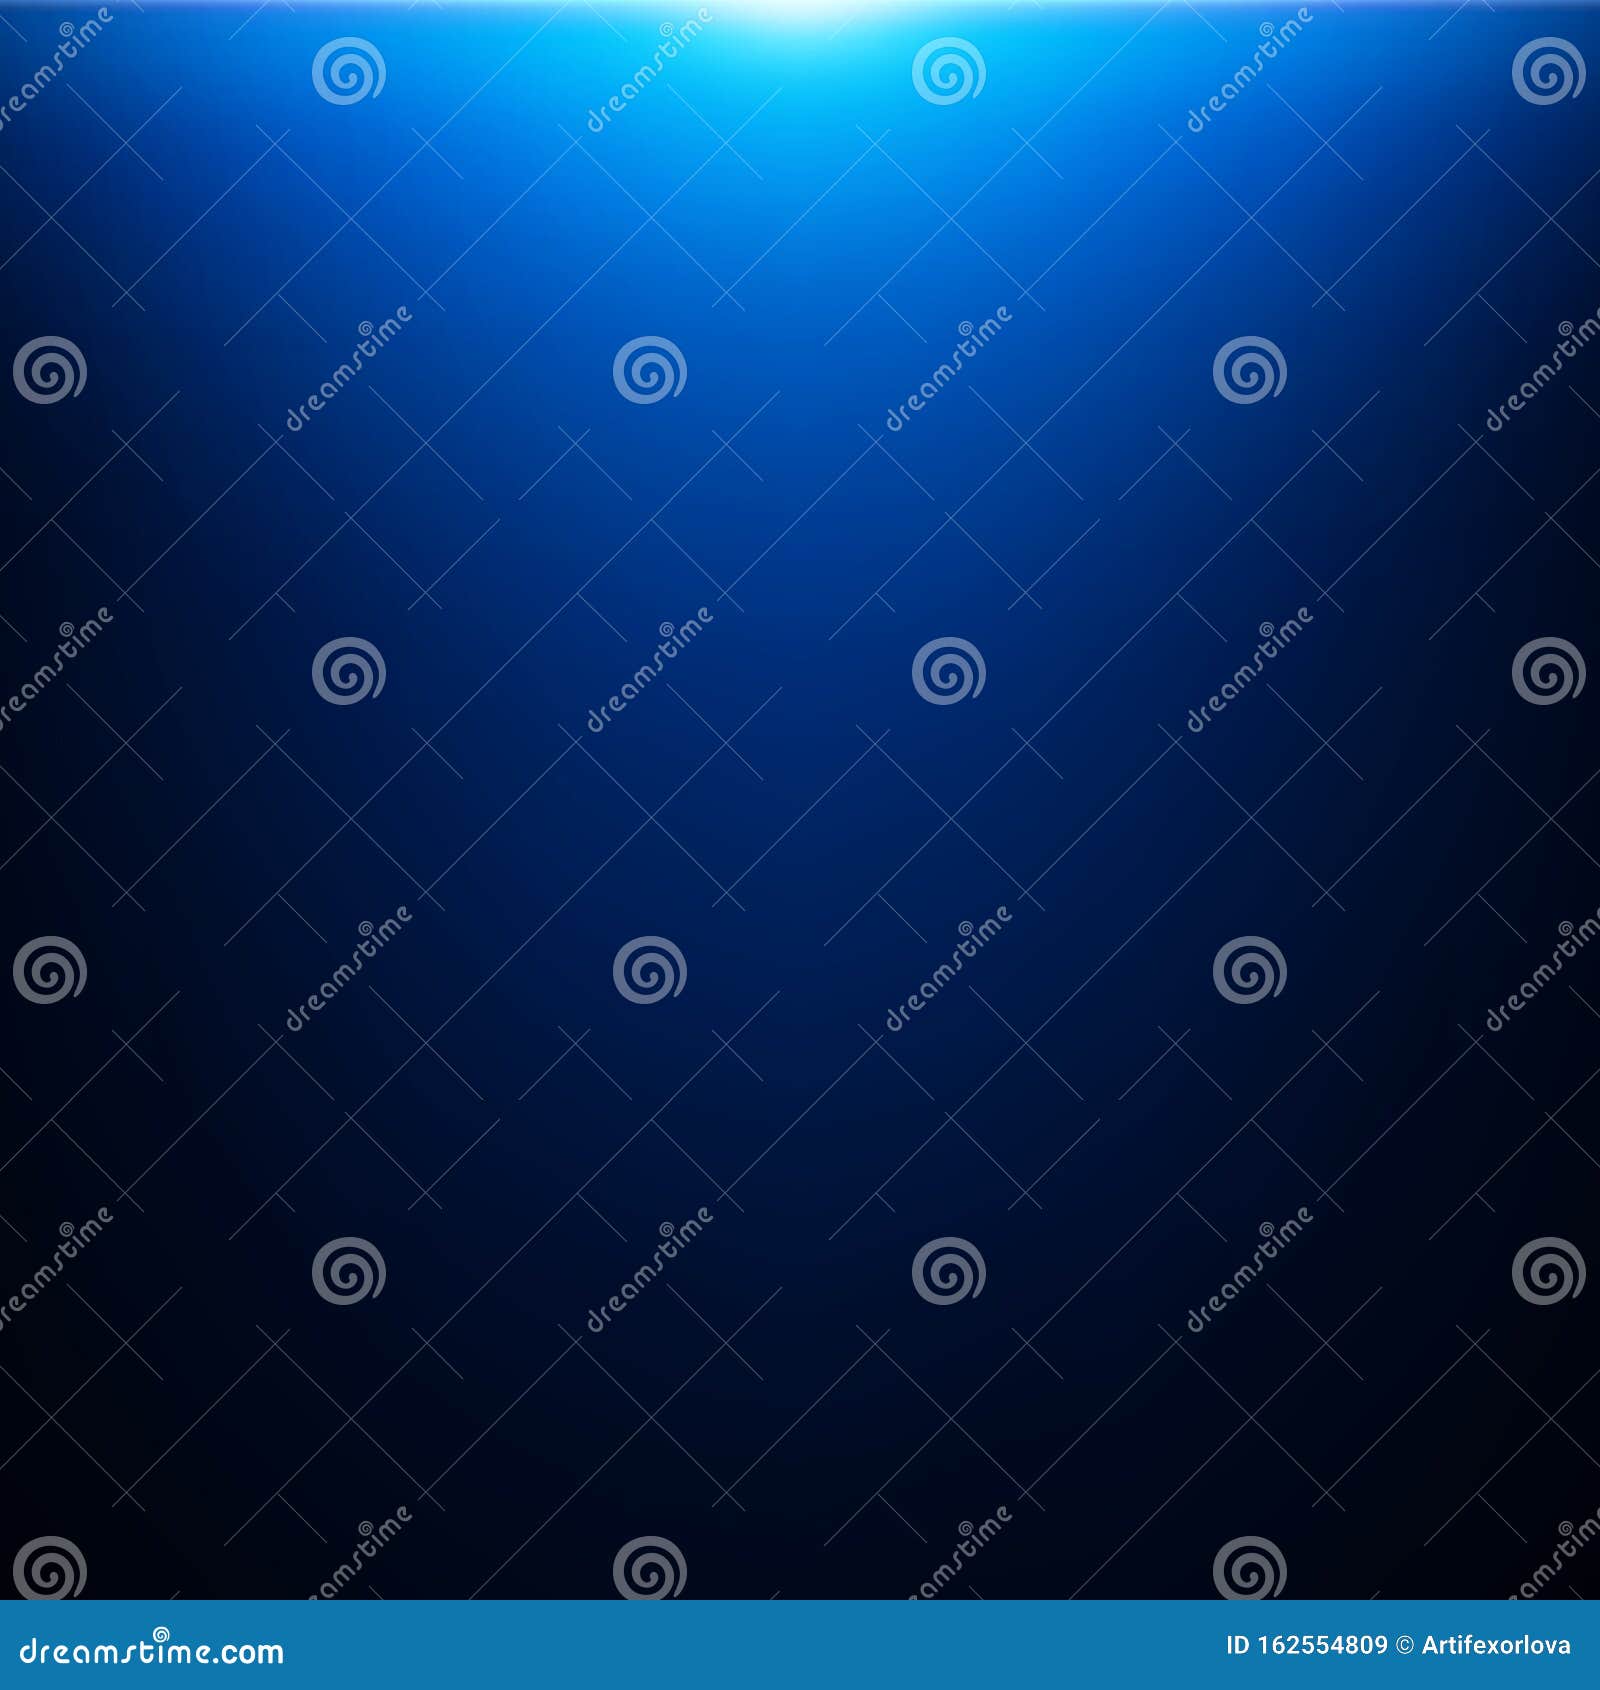 Dark background with blue light effect eps 10 Vector Image